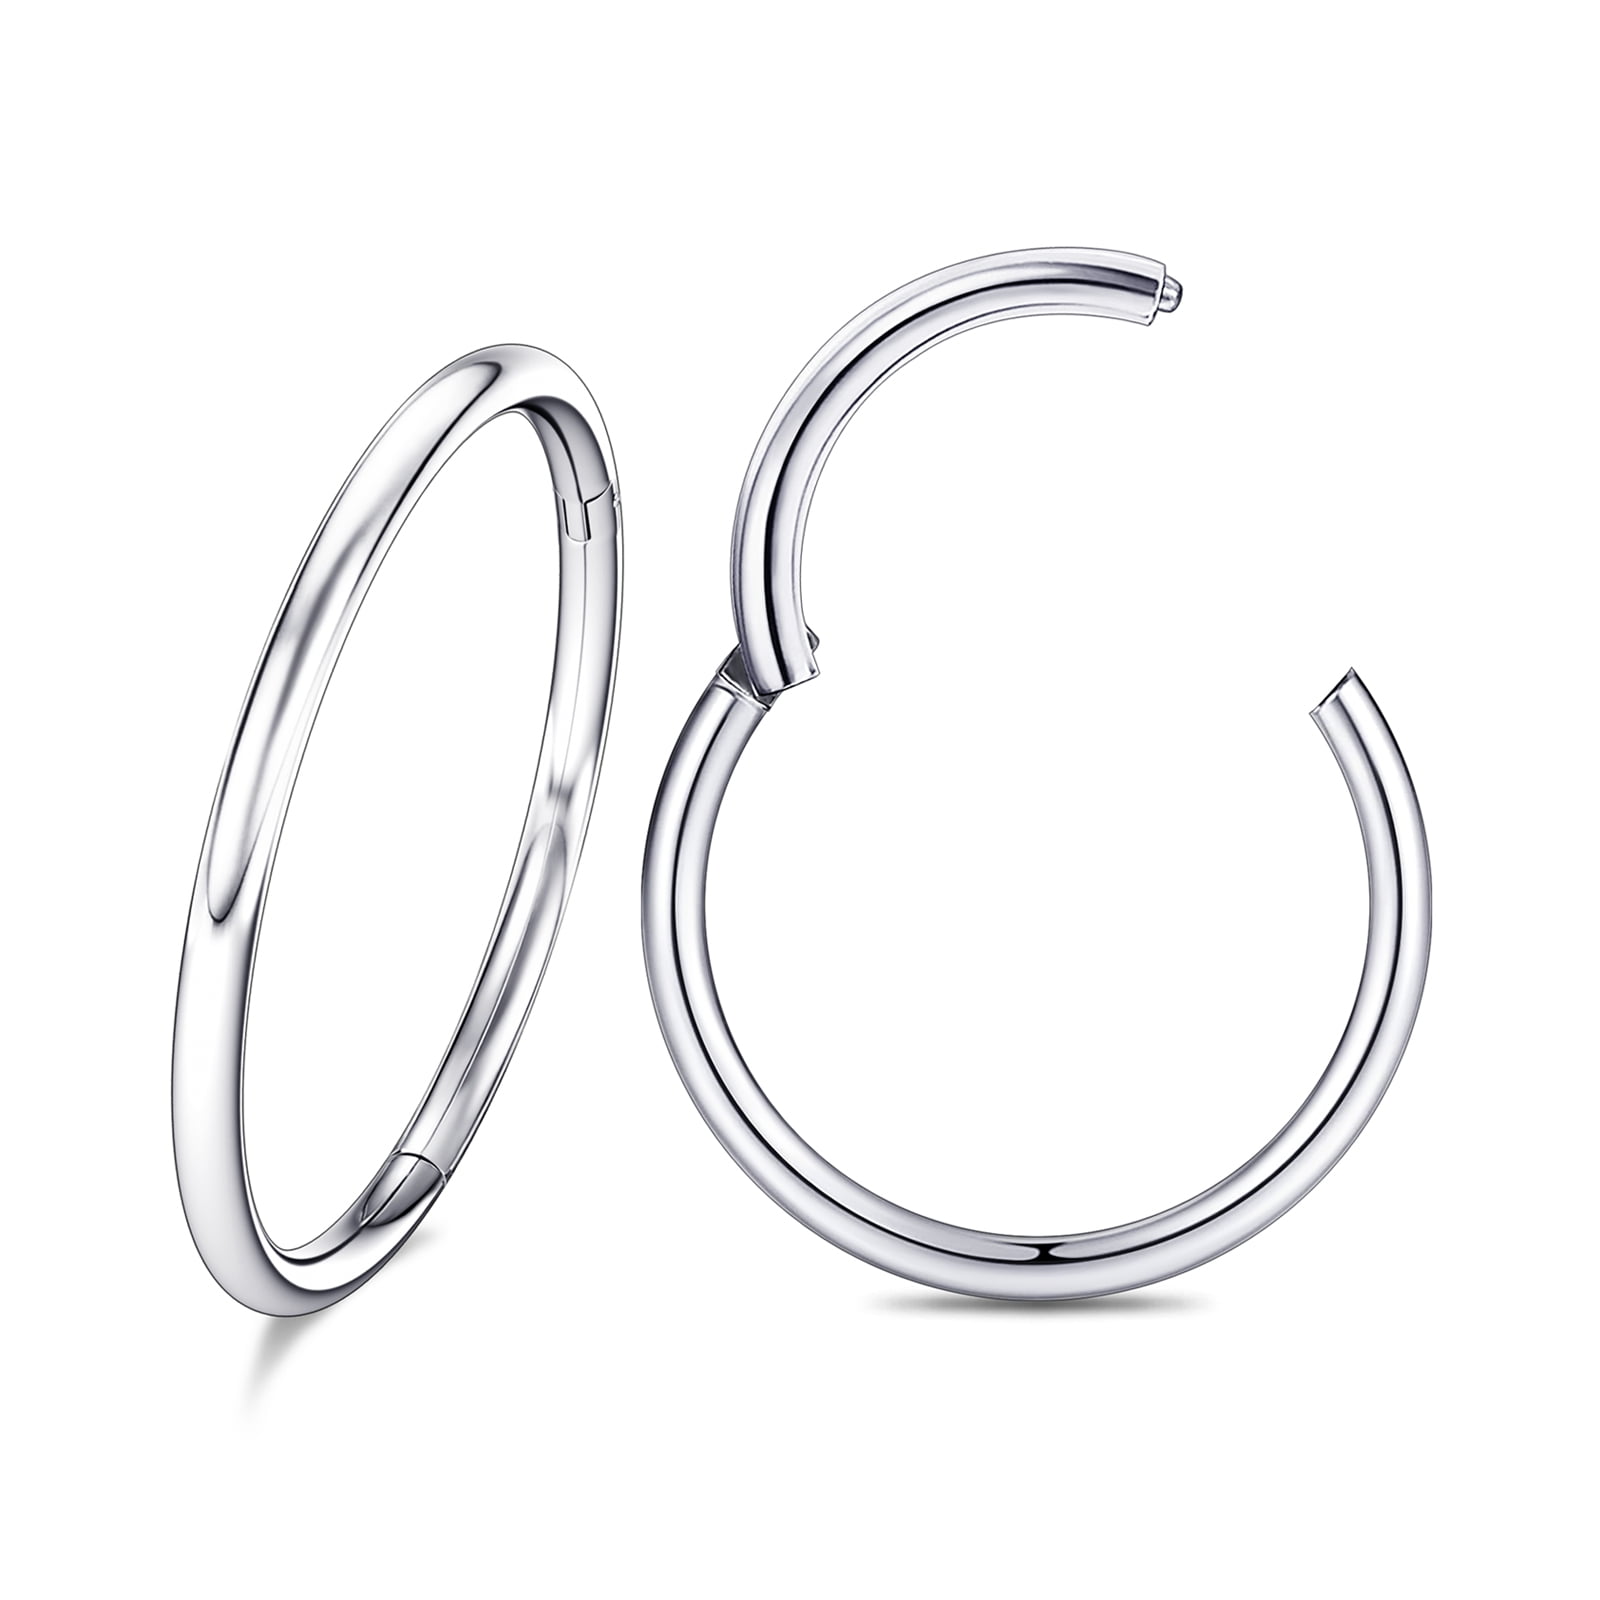 2pcs 18G Surgical Steel CZ Captive Bead Ring Nose ring Earrings Labret Septum 